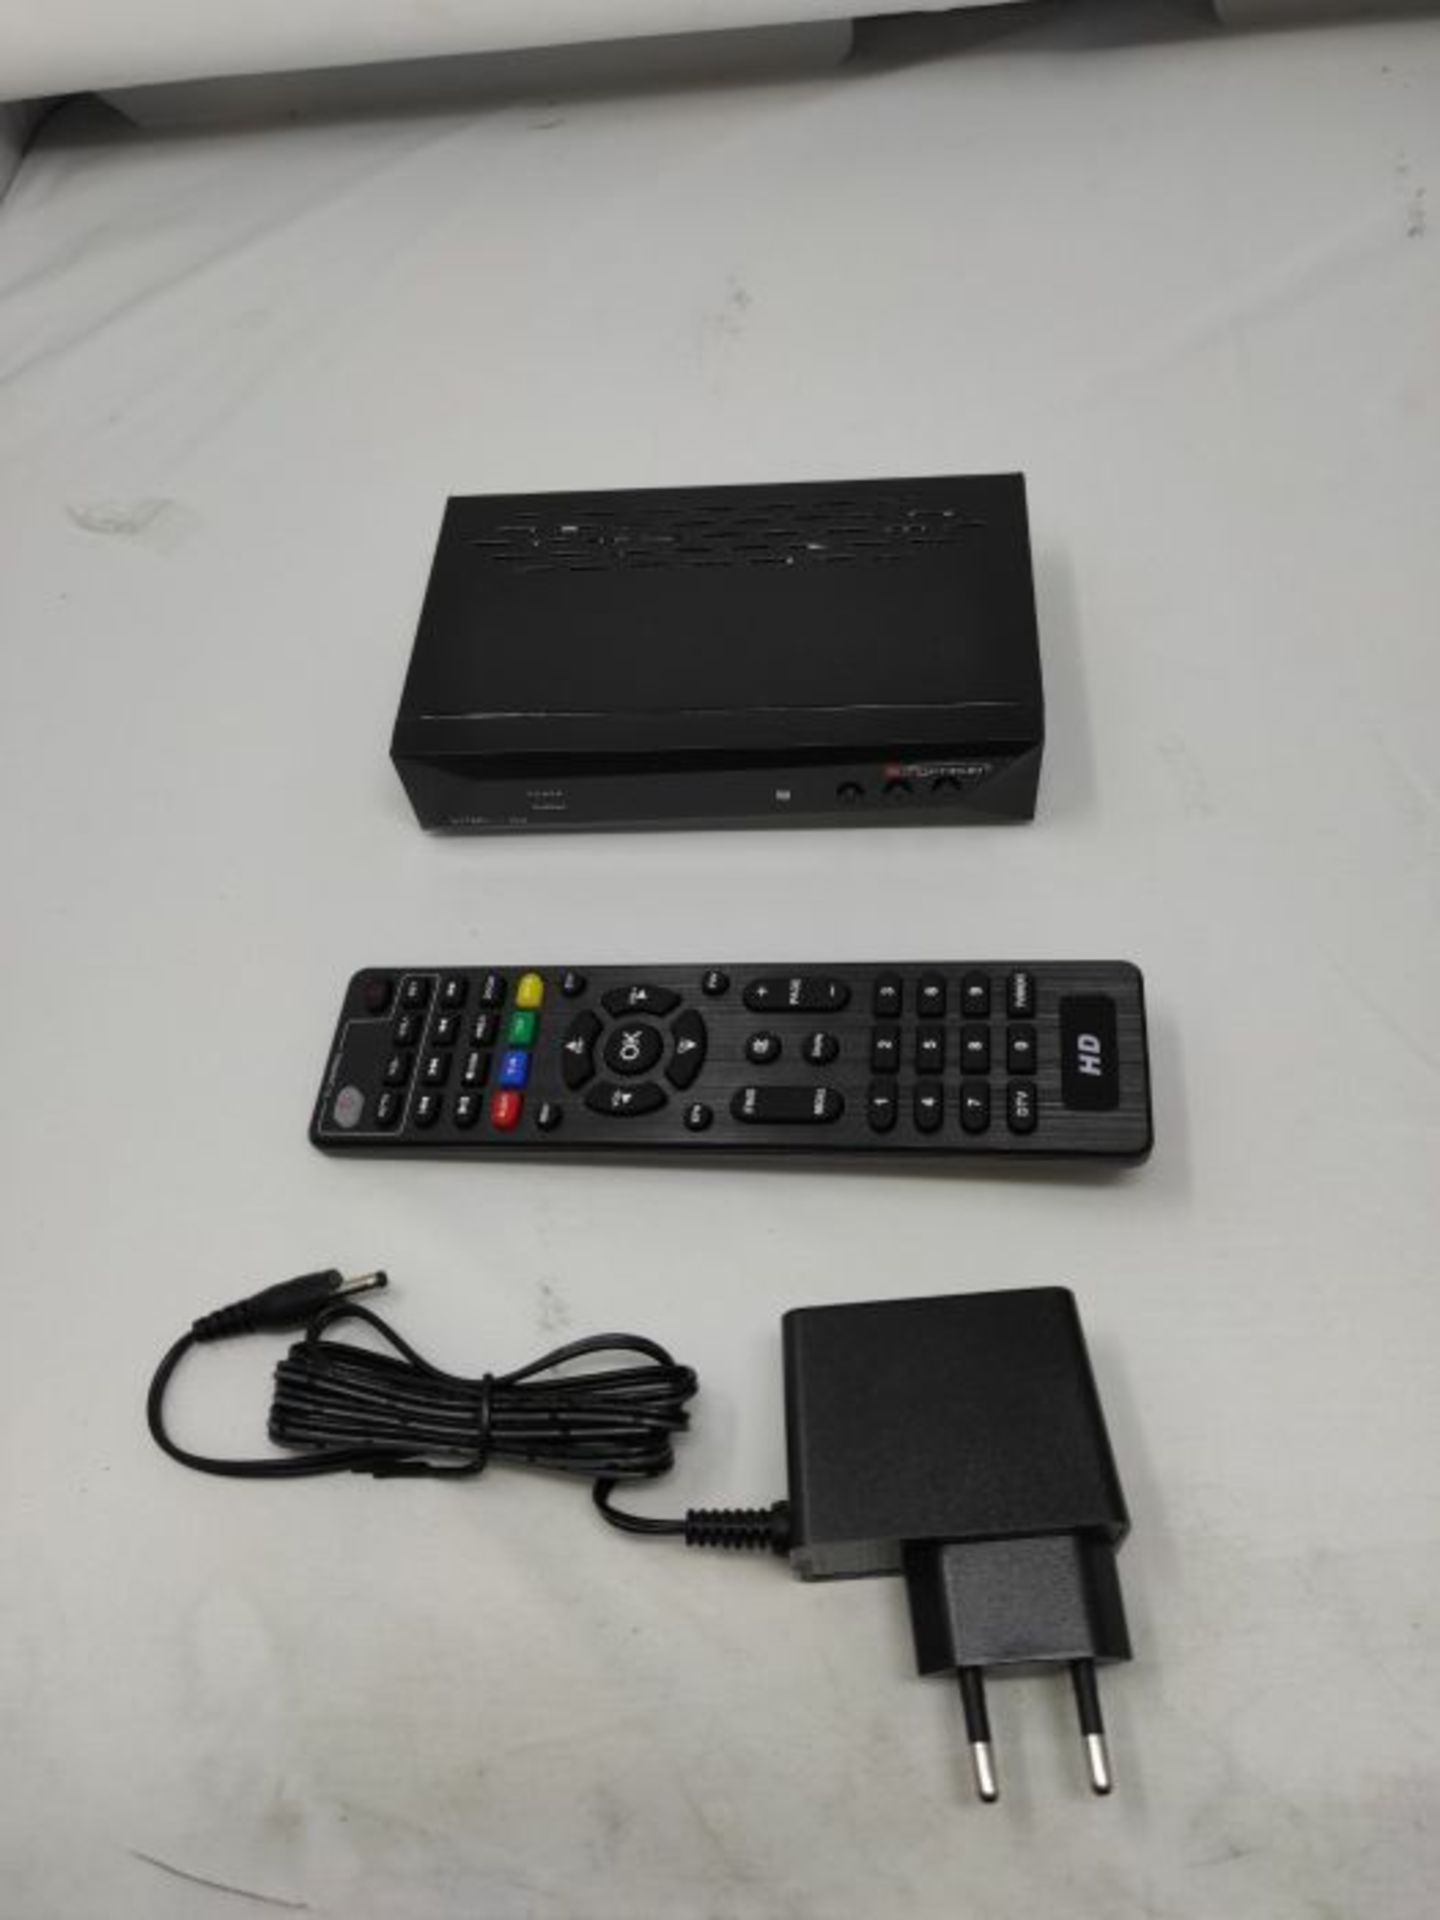 Red Opticum Nytro Box Plus Full HD DVB-T2 and DVB-C Hybrid Receiver with USB Recording - Image 3 of 3